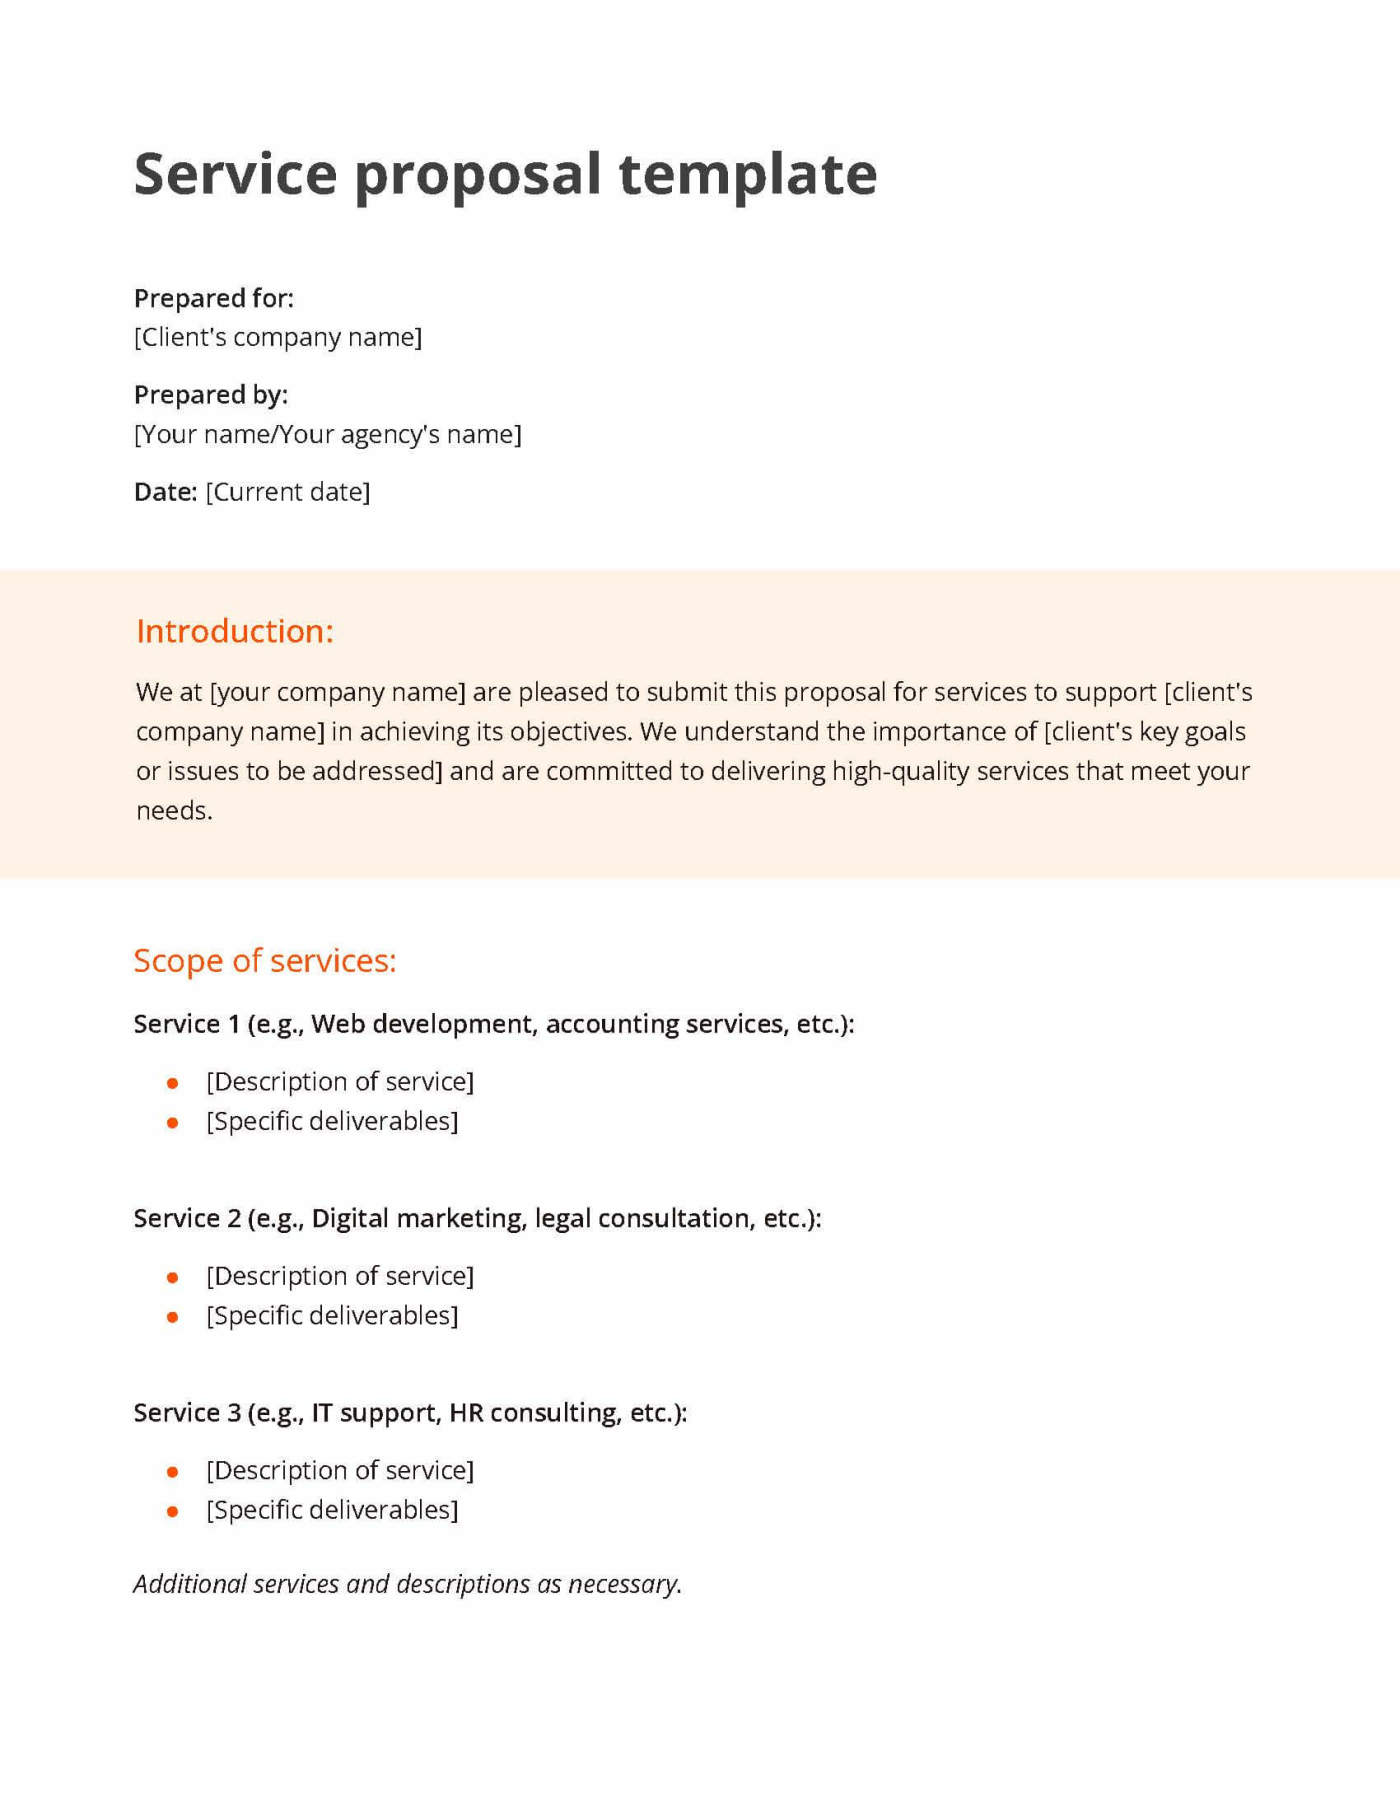 White and orange service proposal template including a section for the introduction and scope of services